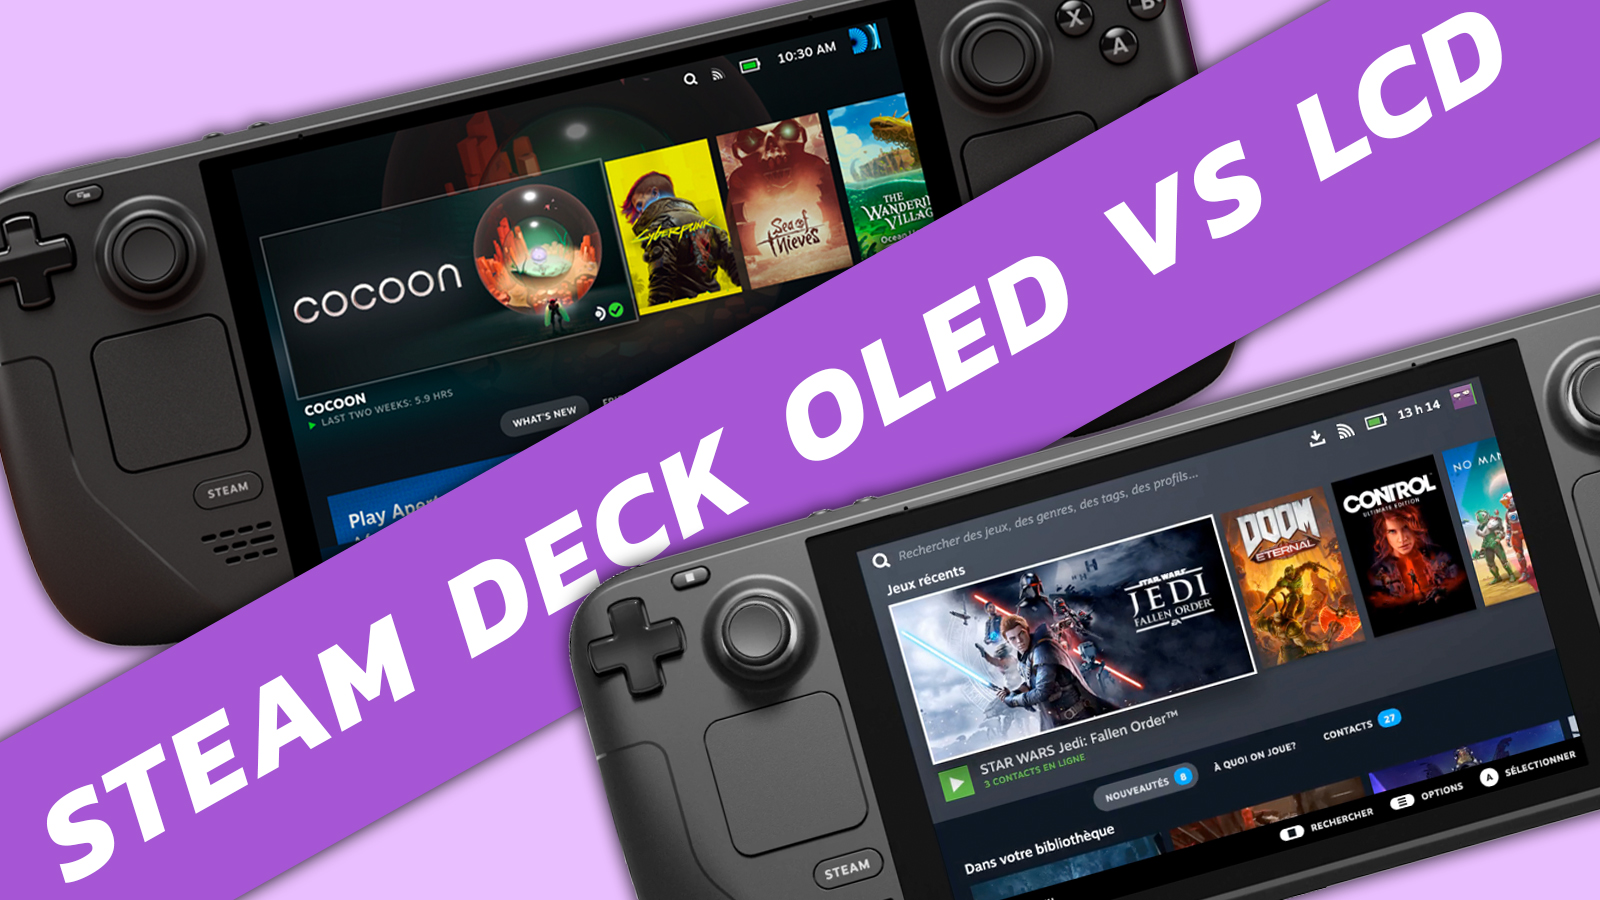 Steam Deck OLED review: More than just a screen upgrade